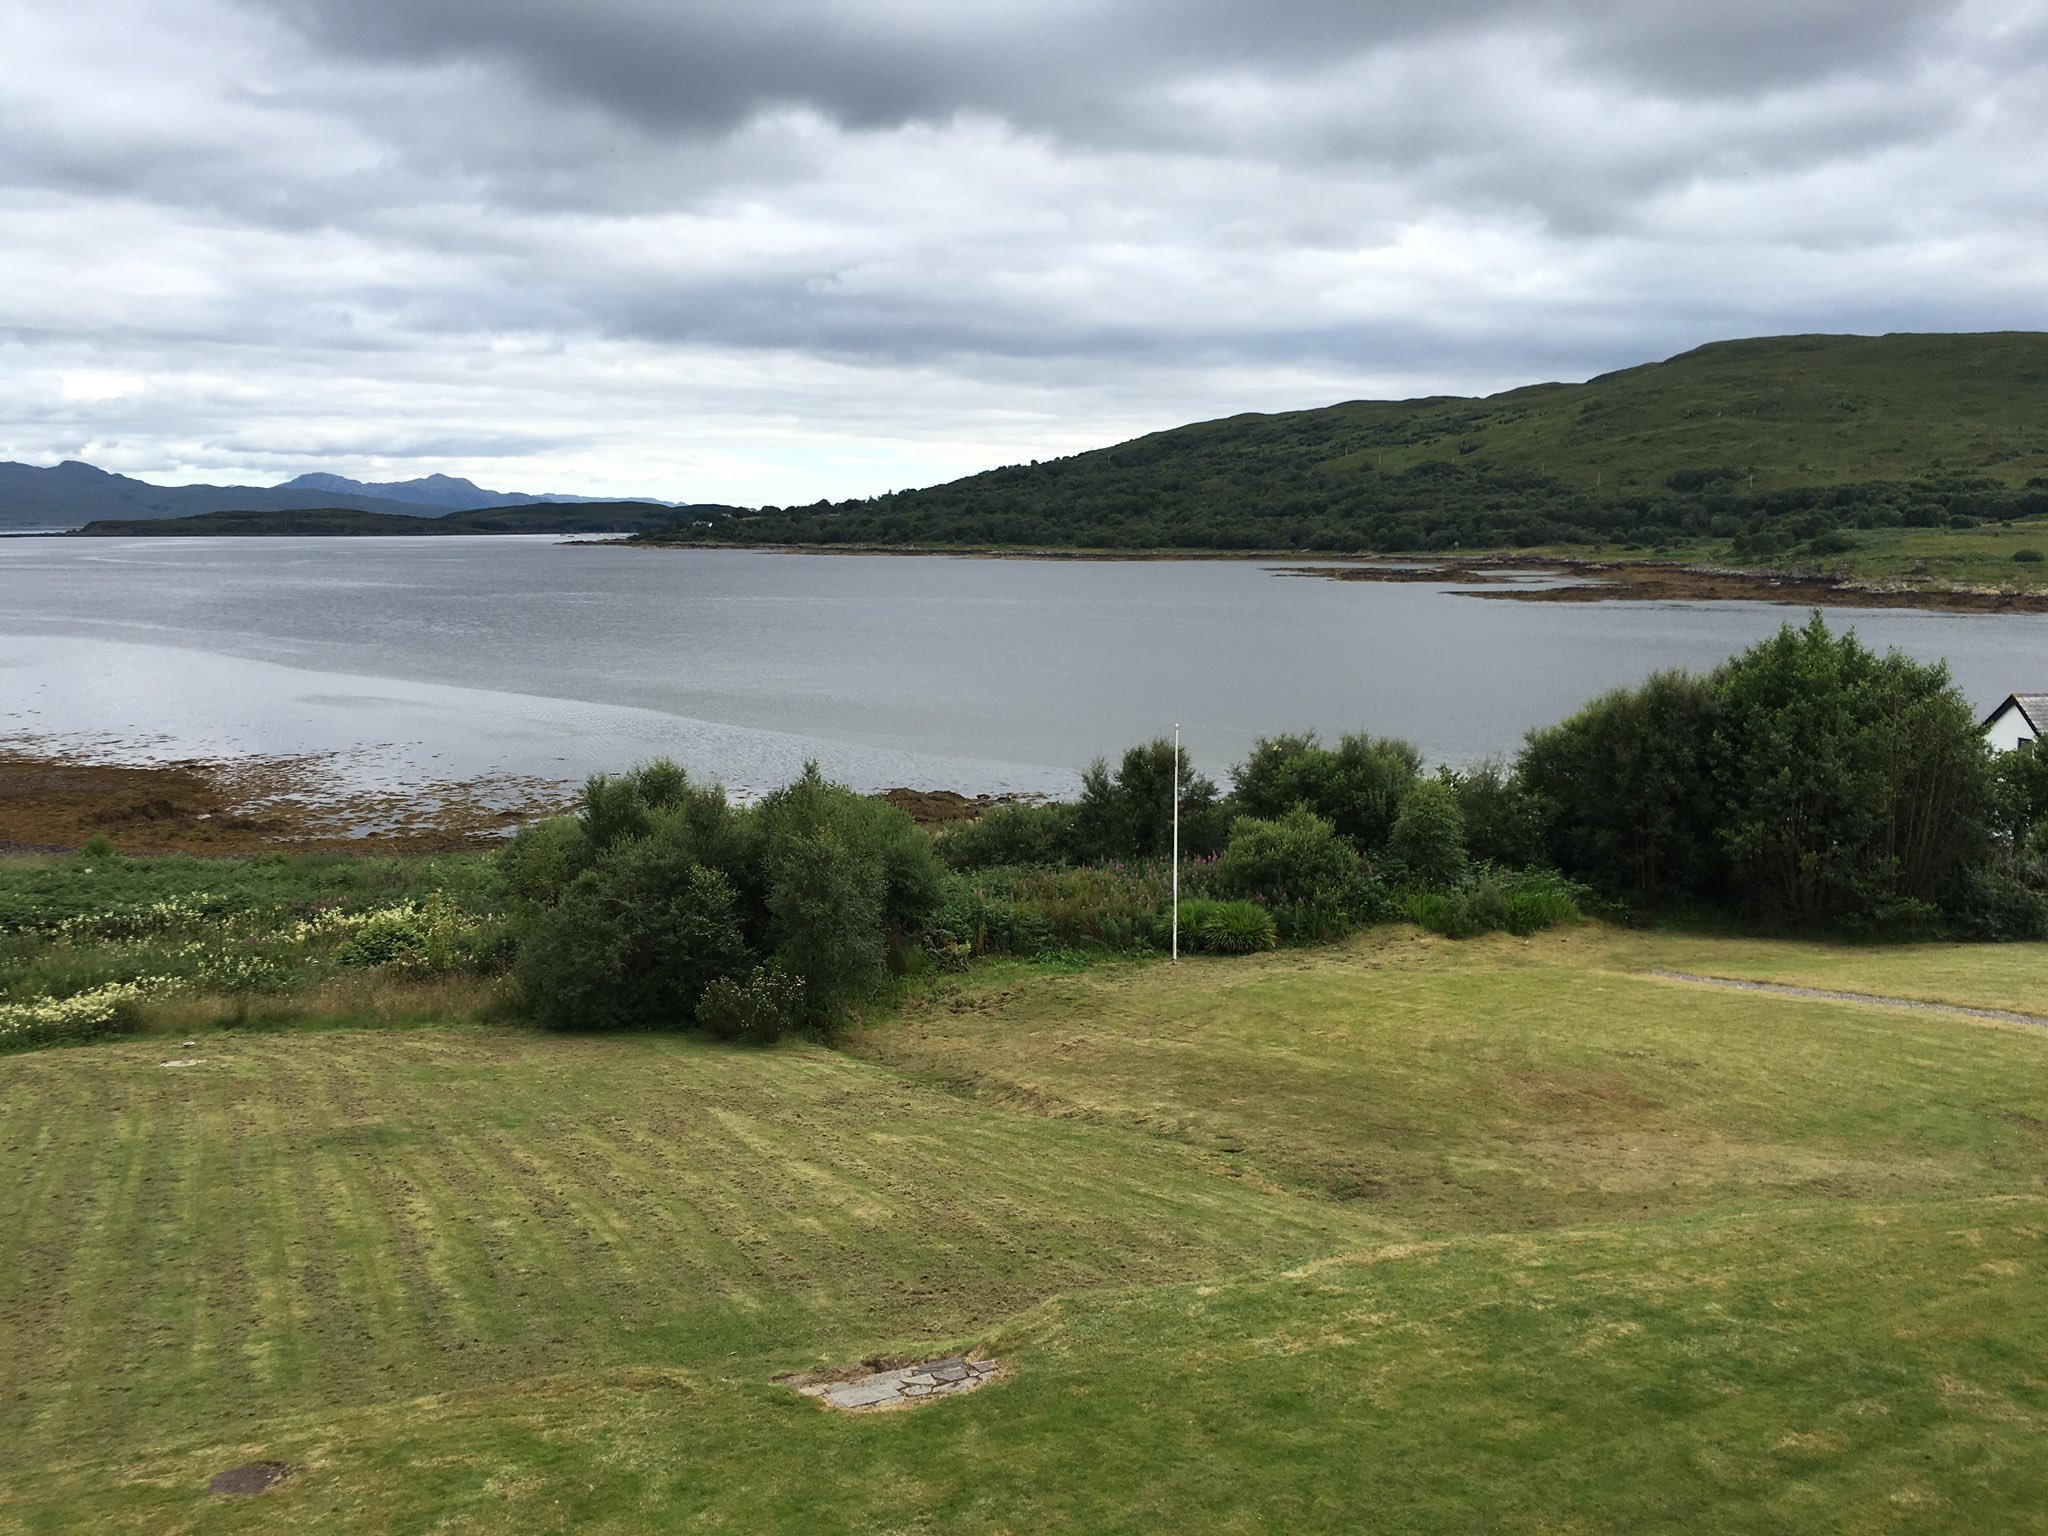 View from our room at the Kinloch Lodge, on the south side of the Isle of Skye. https://t.co/fO5BsCzYuP